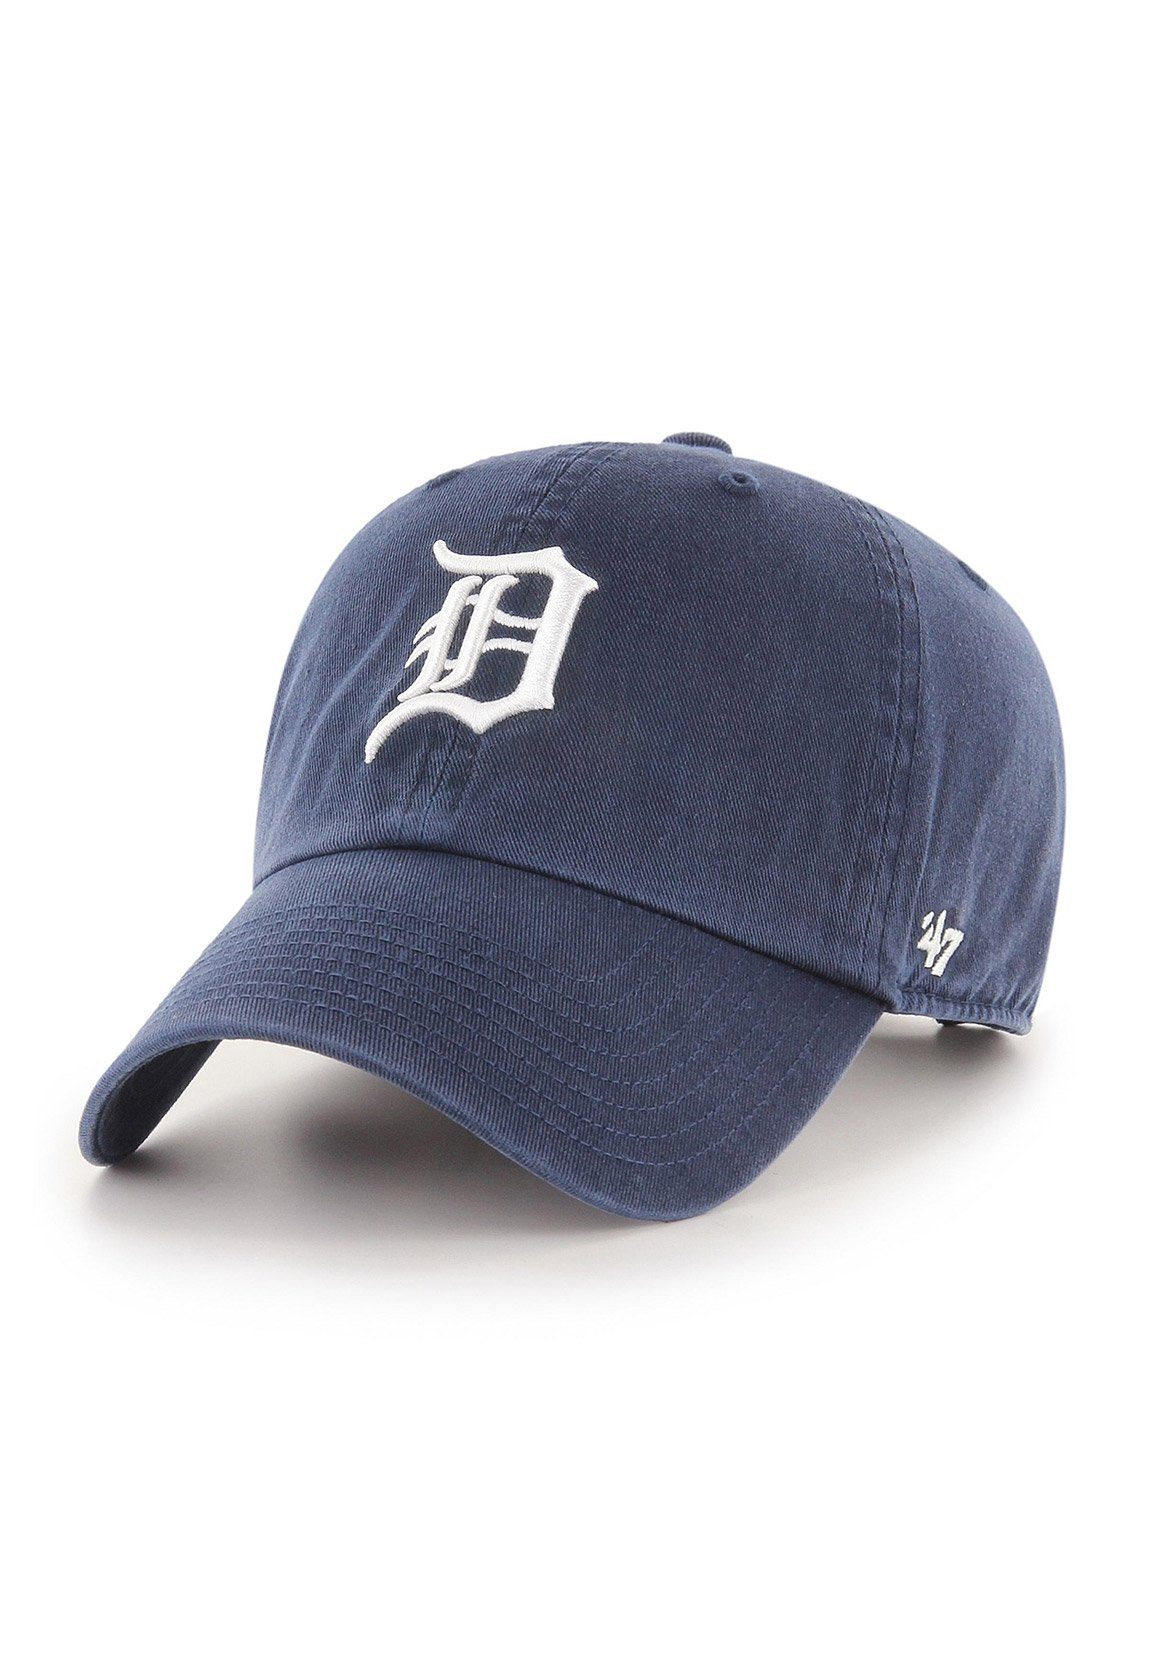 47 Brand Trucker Cap Relaxed Fit MLB Detroit Tigers